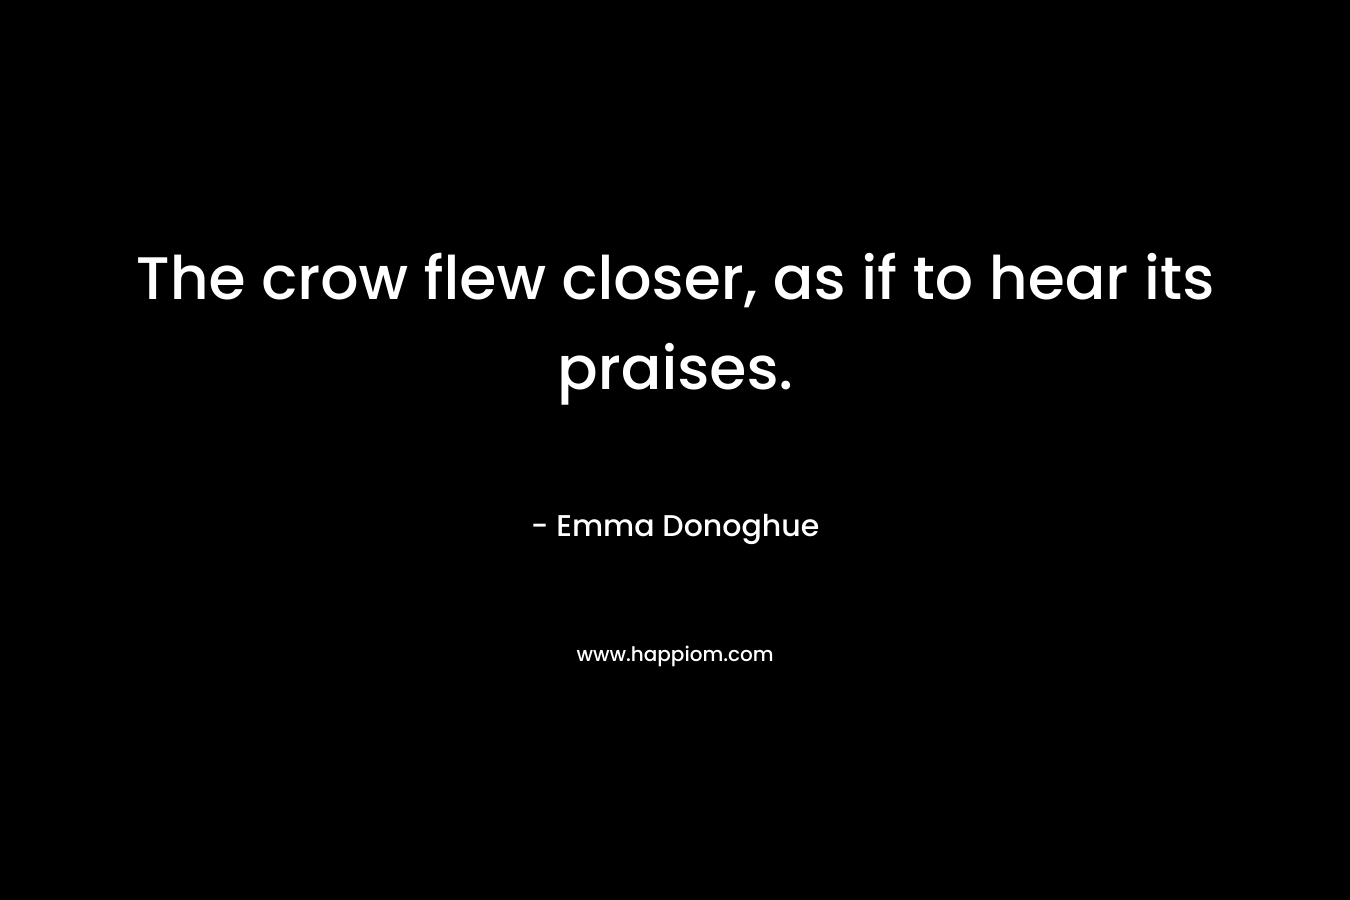 The crow flew closer, as if to hear its praises. – Emma Donoghue